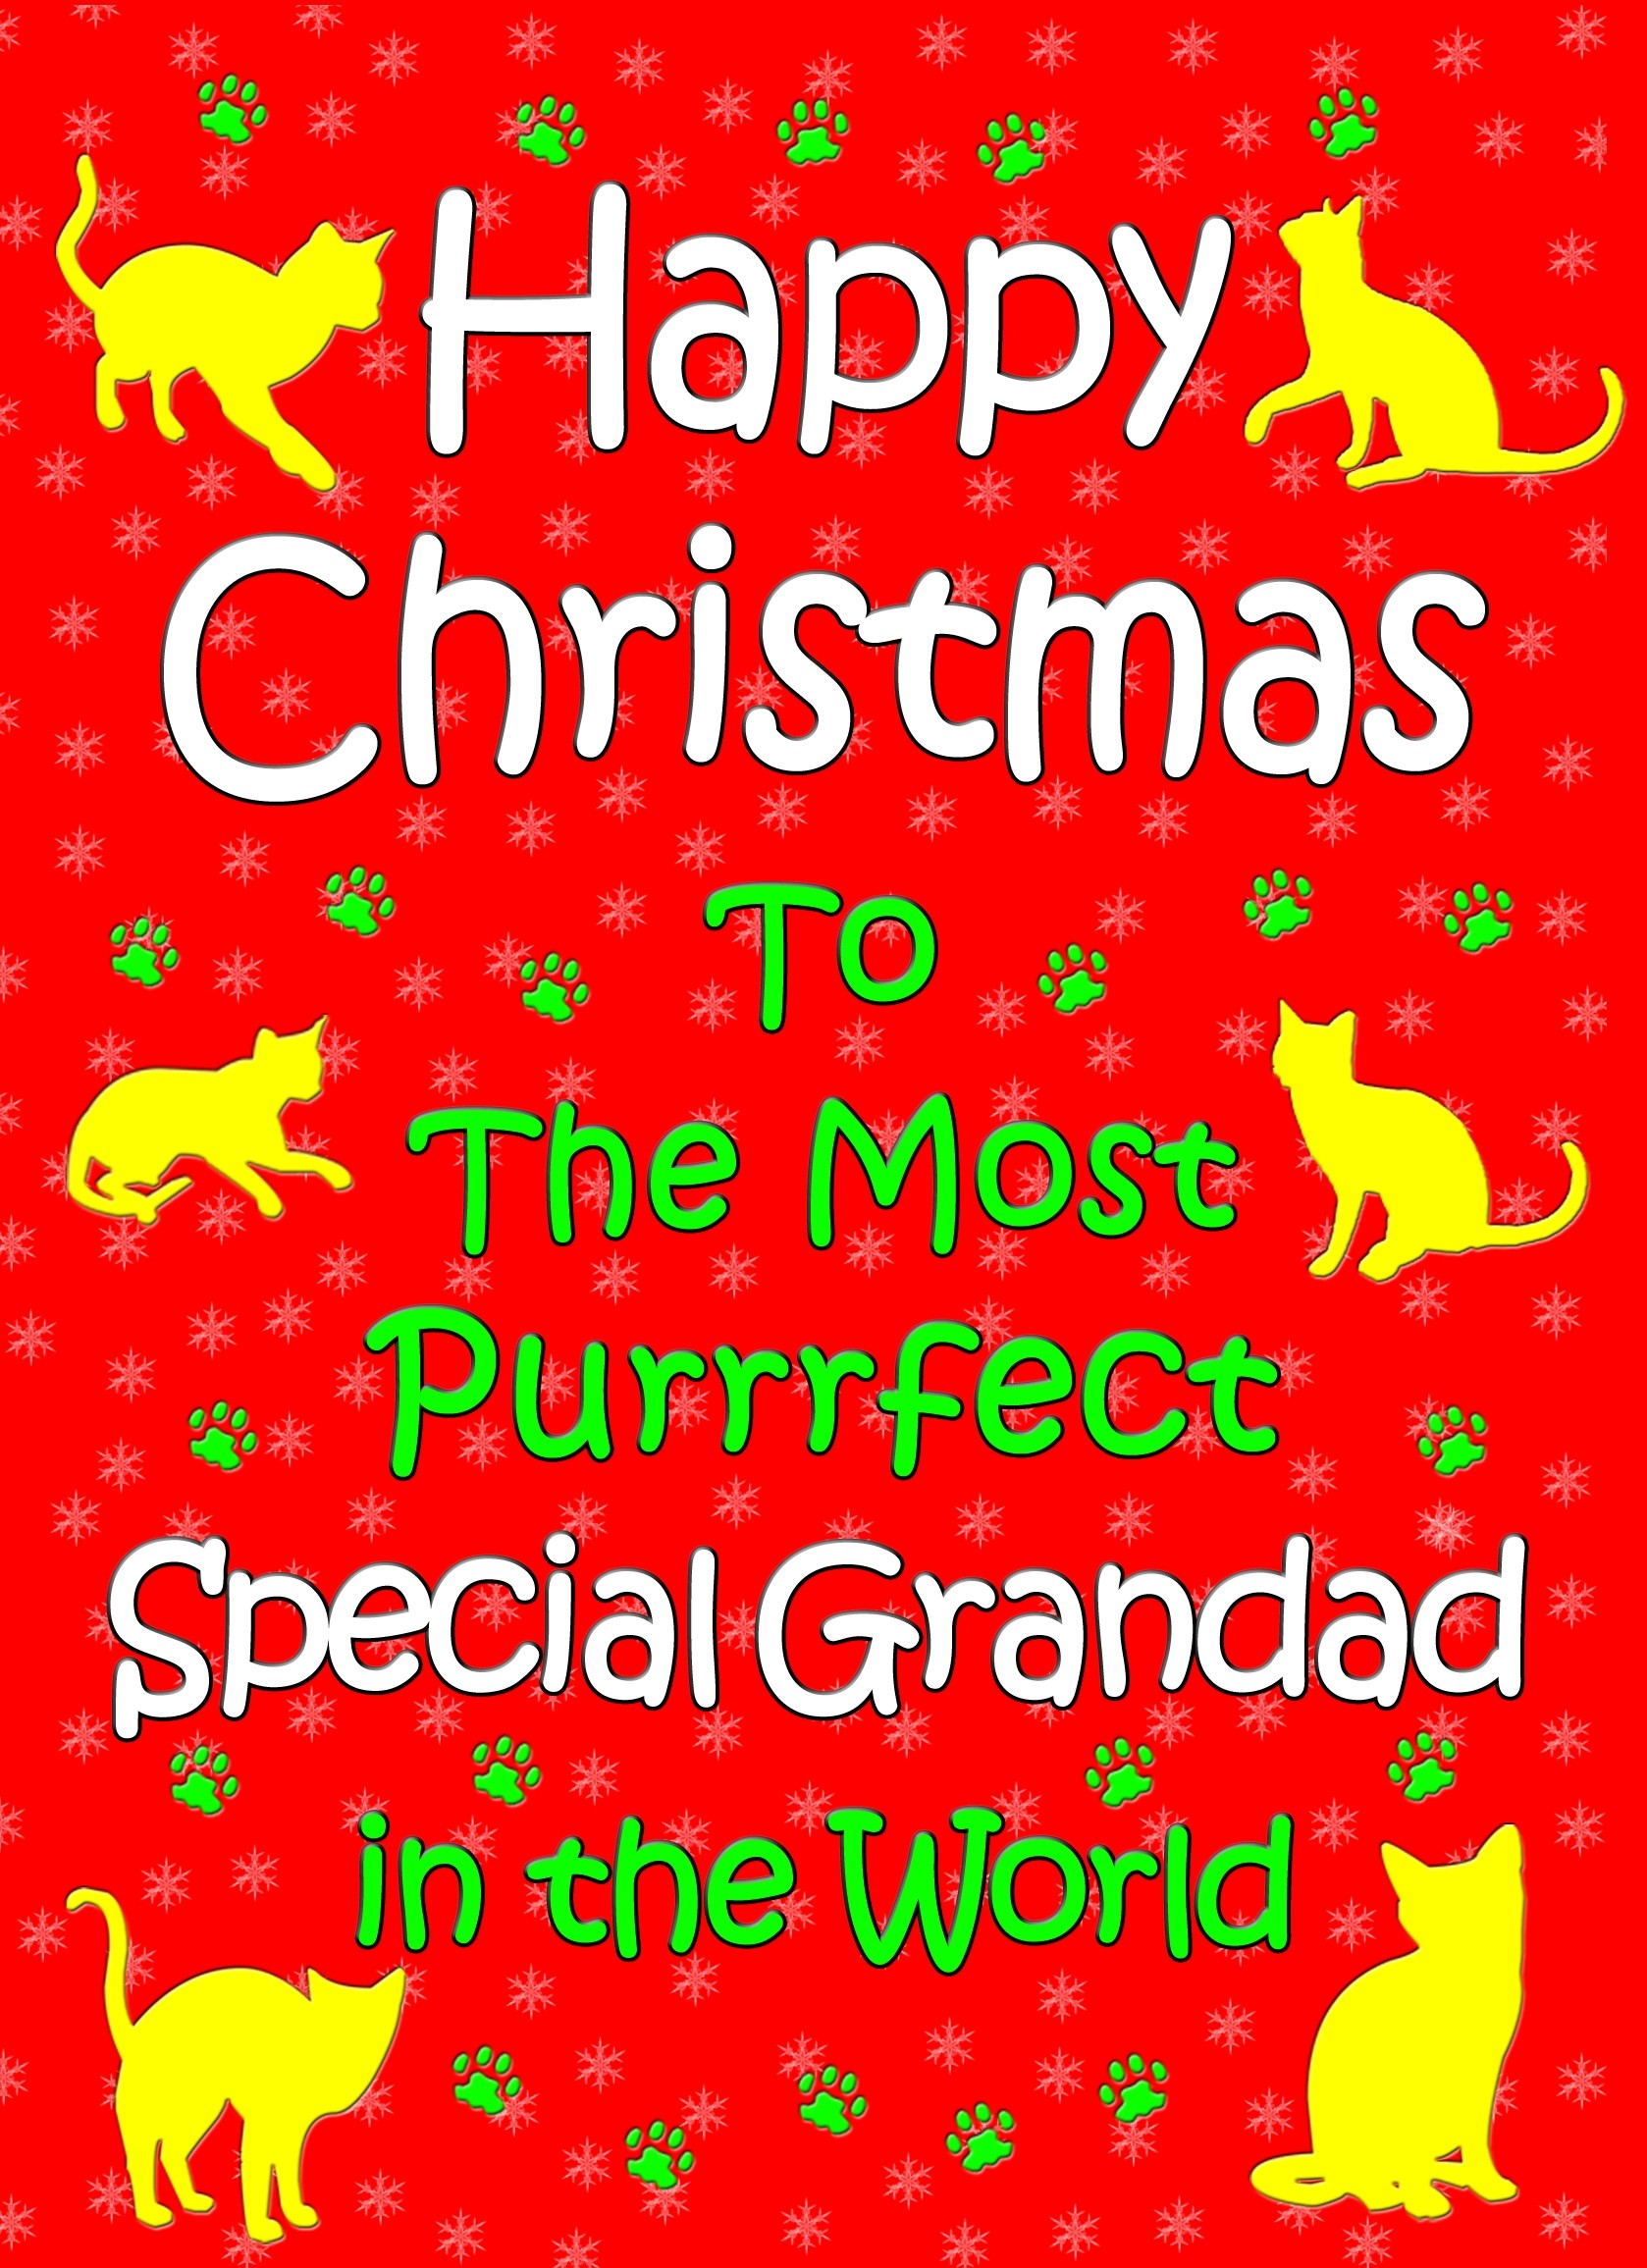 From The Cat Christmas Card (Special Grandad, Red)